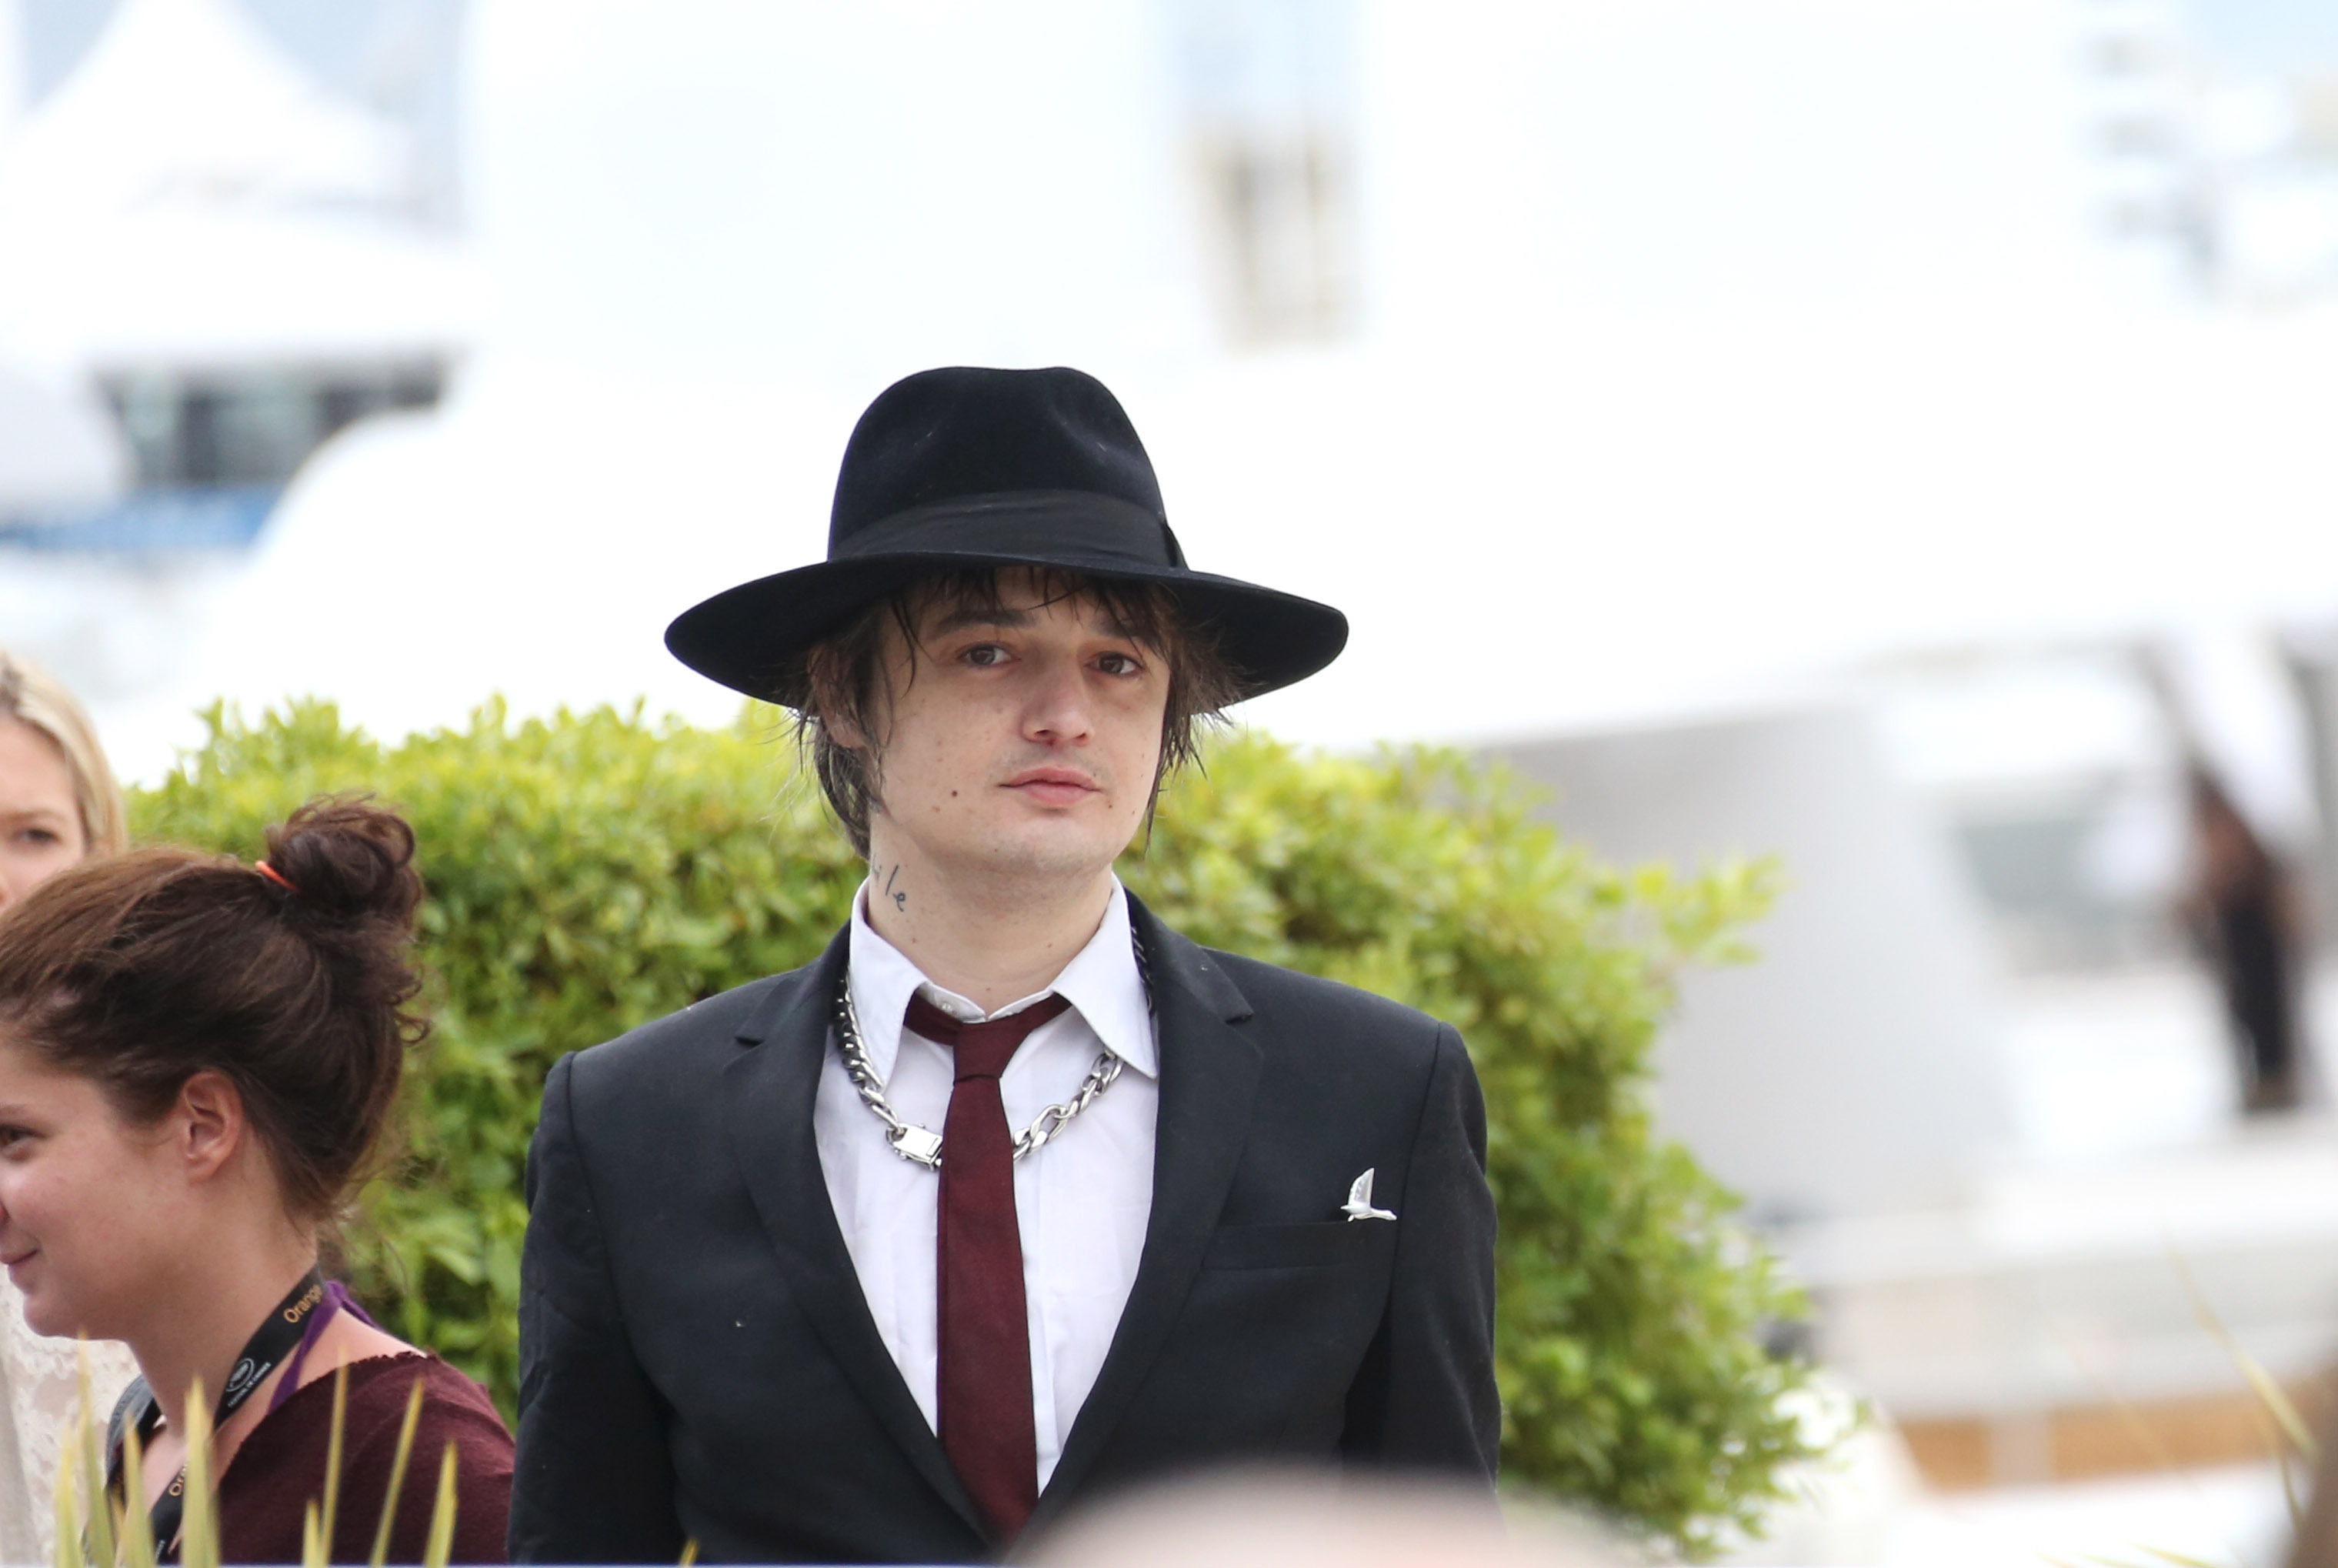 Pete Doherty has got rid of his mobile phone